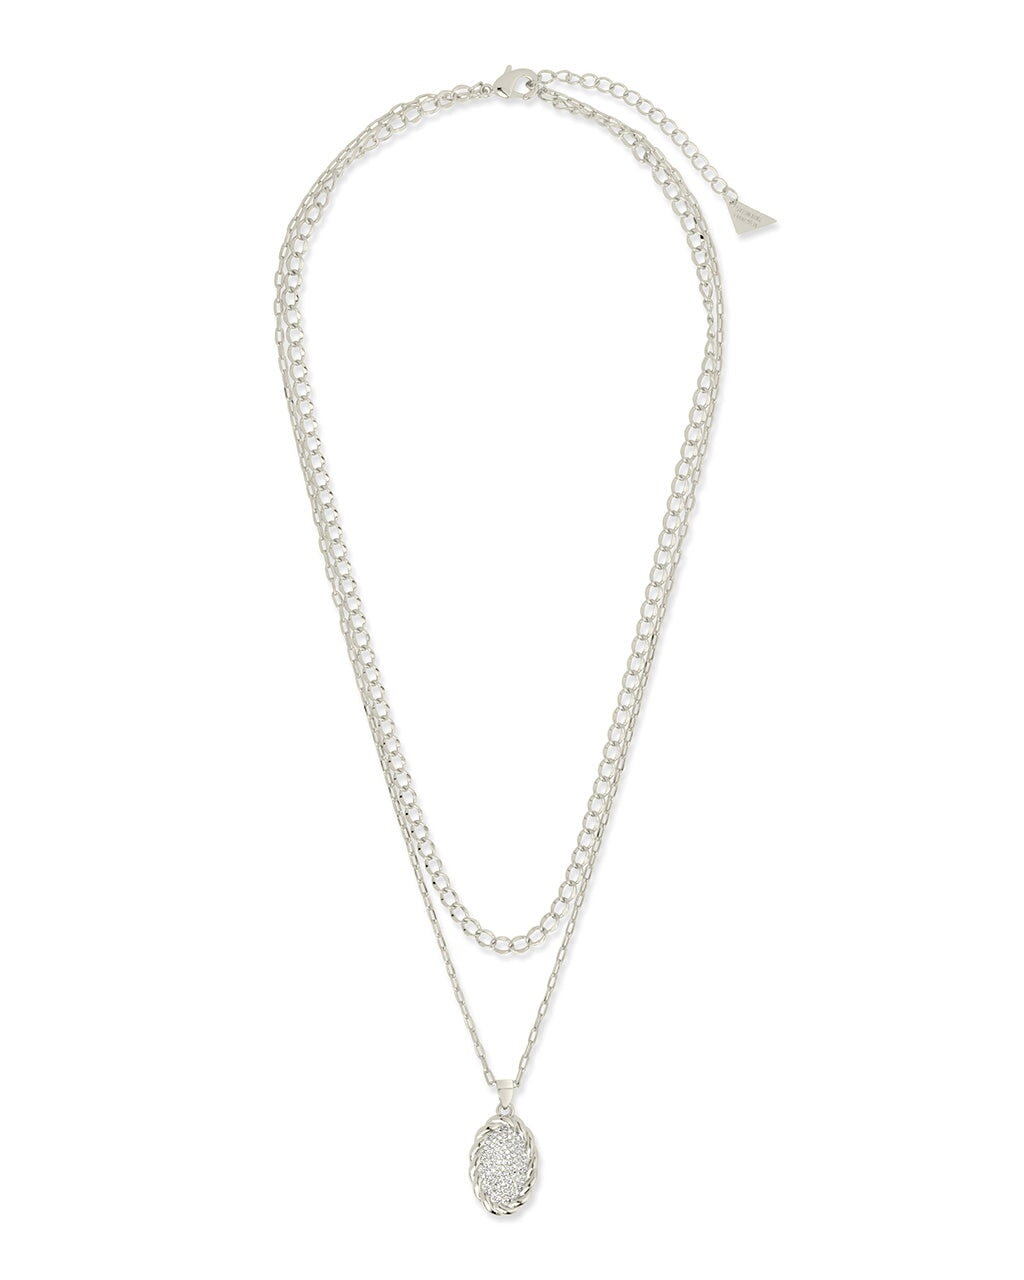 Galette Layered Necklace Necklace Sterling Forever 